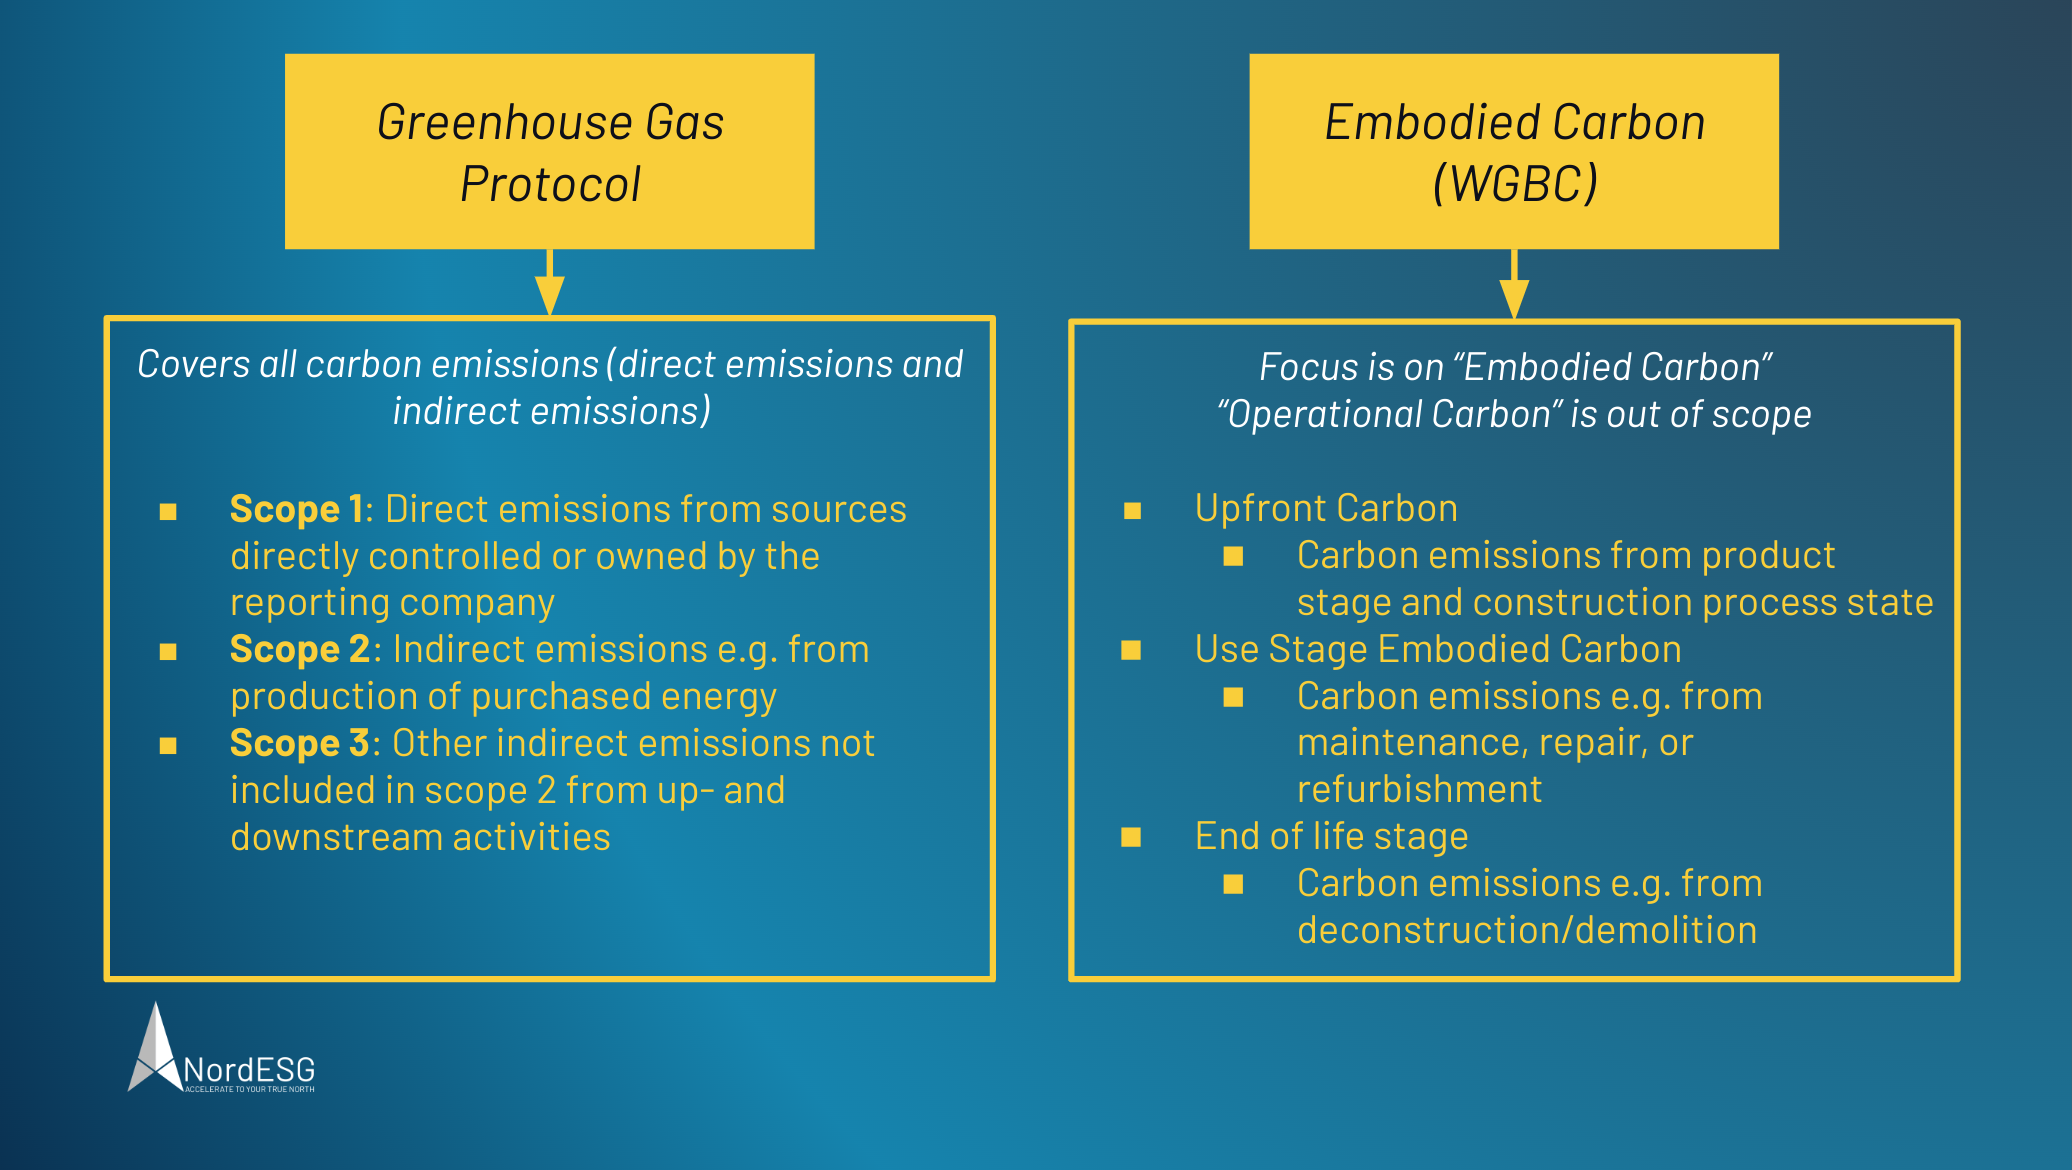 GHG Protocol and Embodied Carbon WBGC